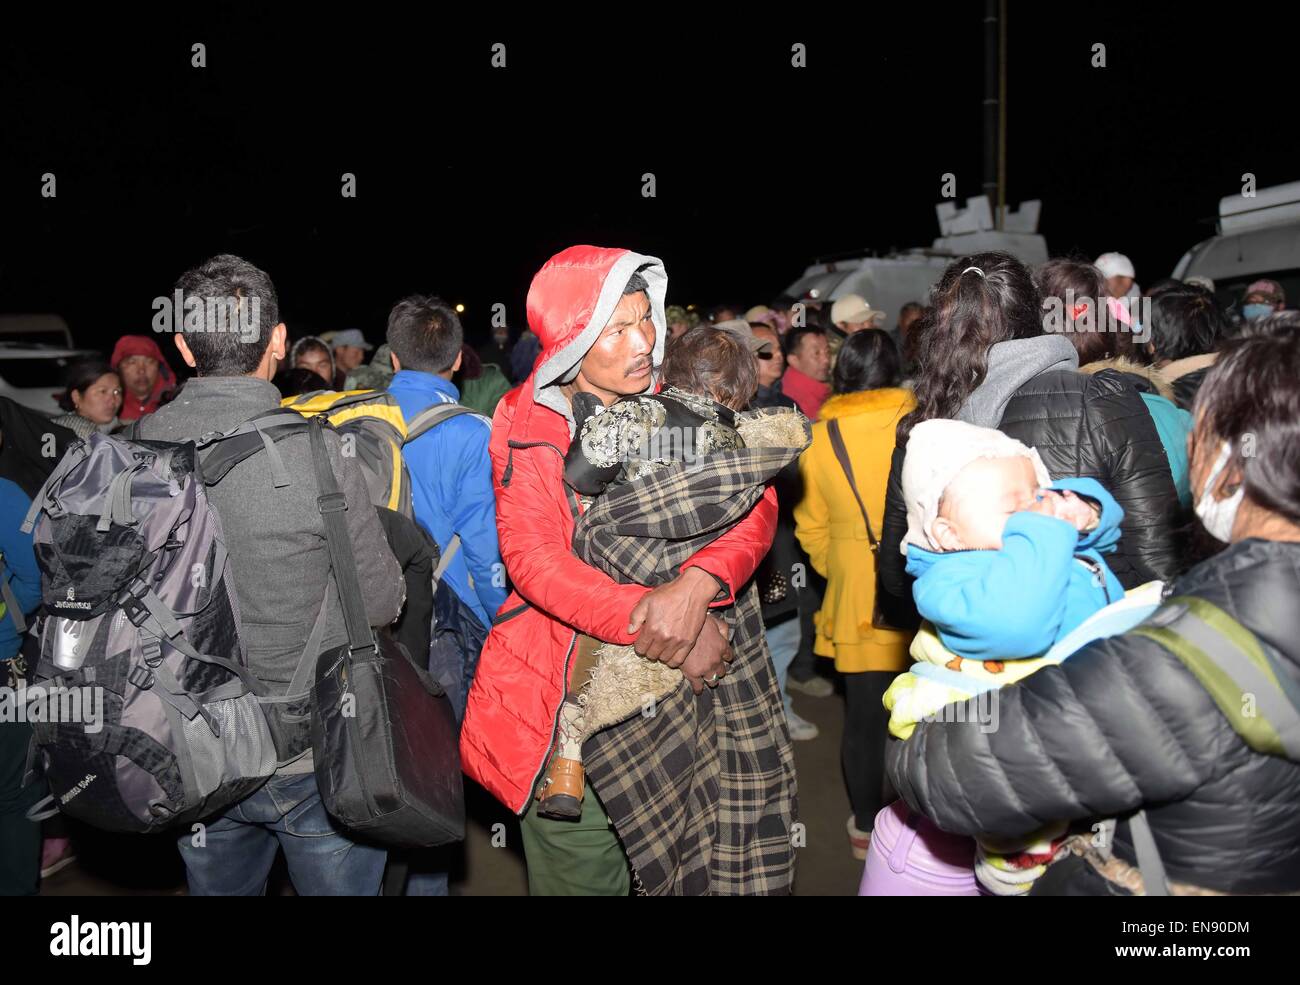 Lhaze, China's Tibet Autonomous Region. 30th Apr, 2015. People evacuated from Zham Town arrive at a temporary settlement in Lhaze County of Xigaze City, southwest China's Tibet Autonomous Region, April 30, 2015. Nearly 1,000 displaced residents from Zham Town in Nyalam County arrived at the resettlement in Lhatze County, some 300 kilometers away from Zham, in army trucks, private cars and taxis Thursday morning. © Xue Yubin/Xinhua/Alamy Live News Stock Photo